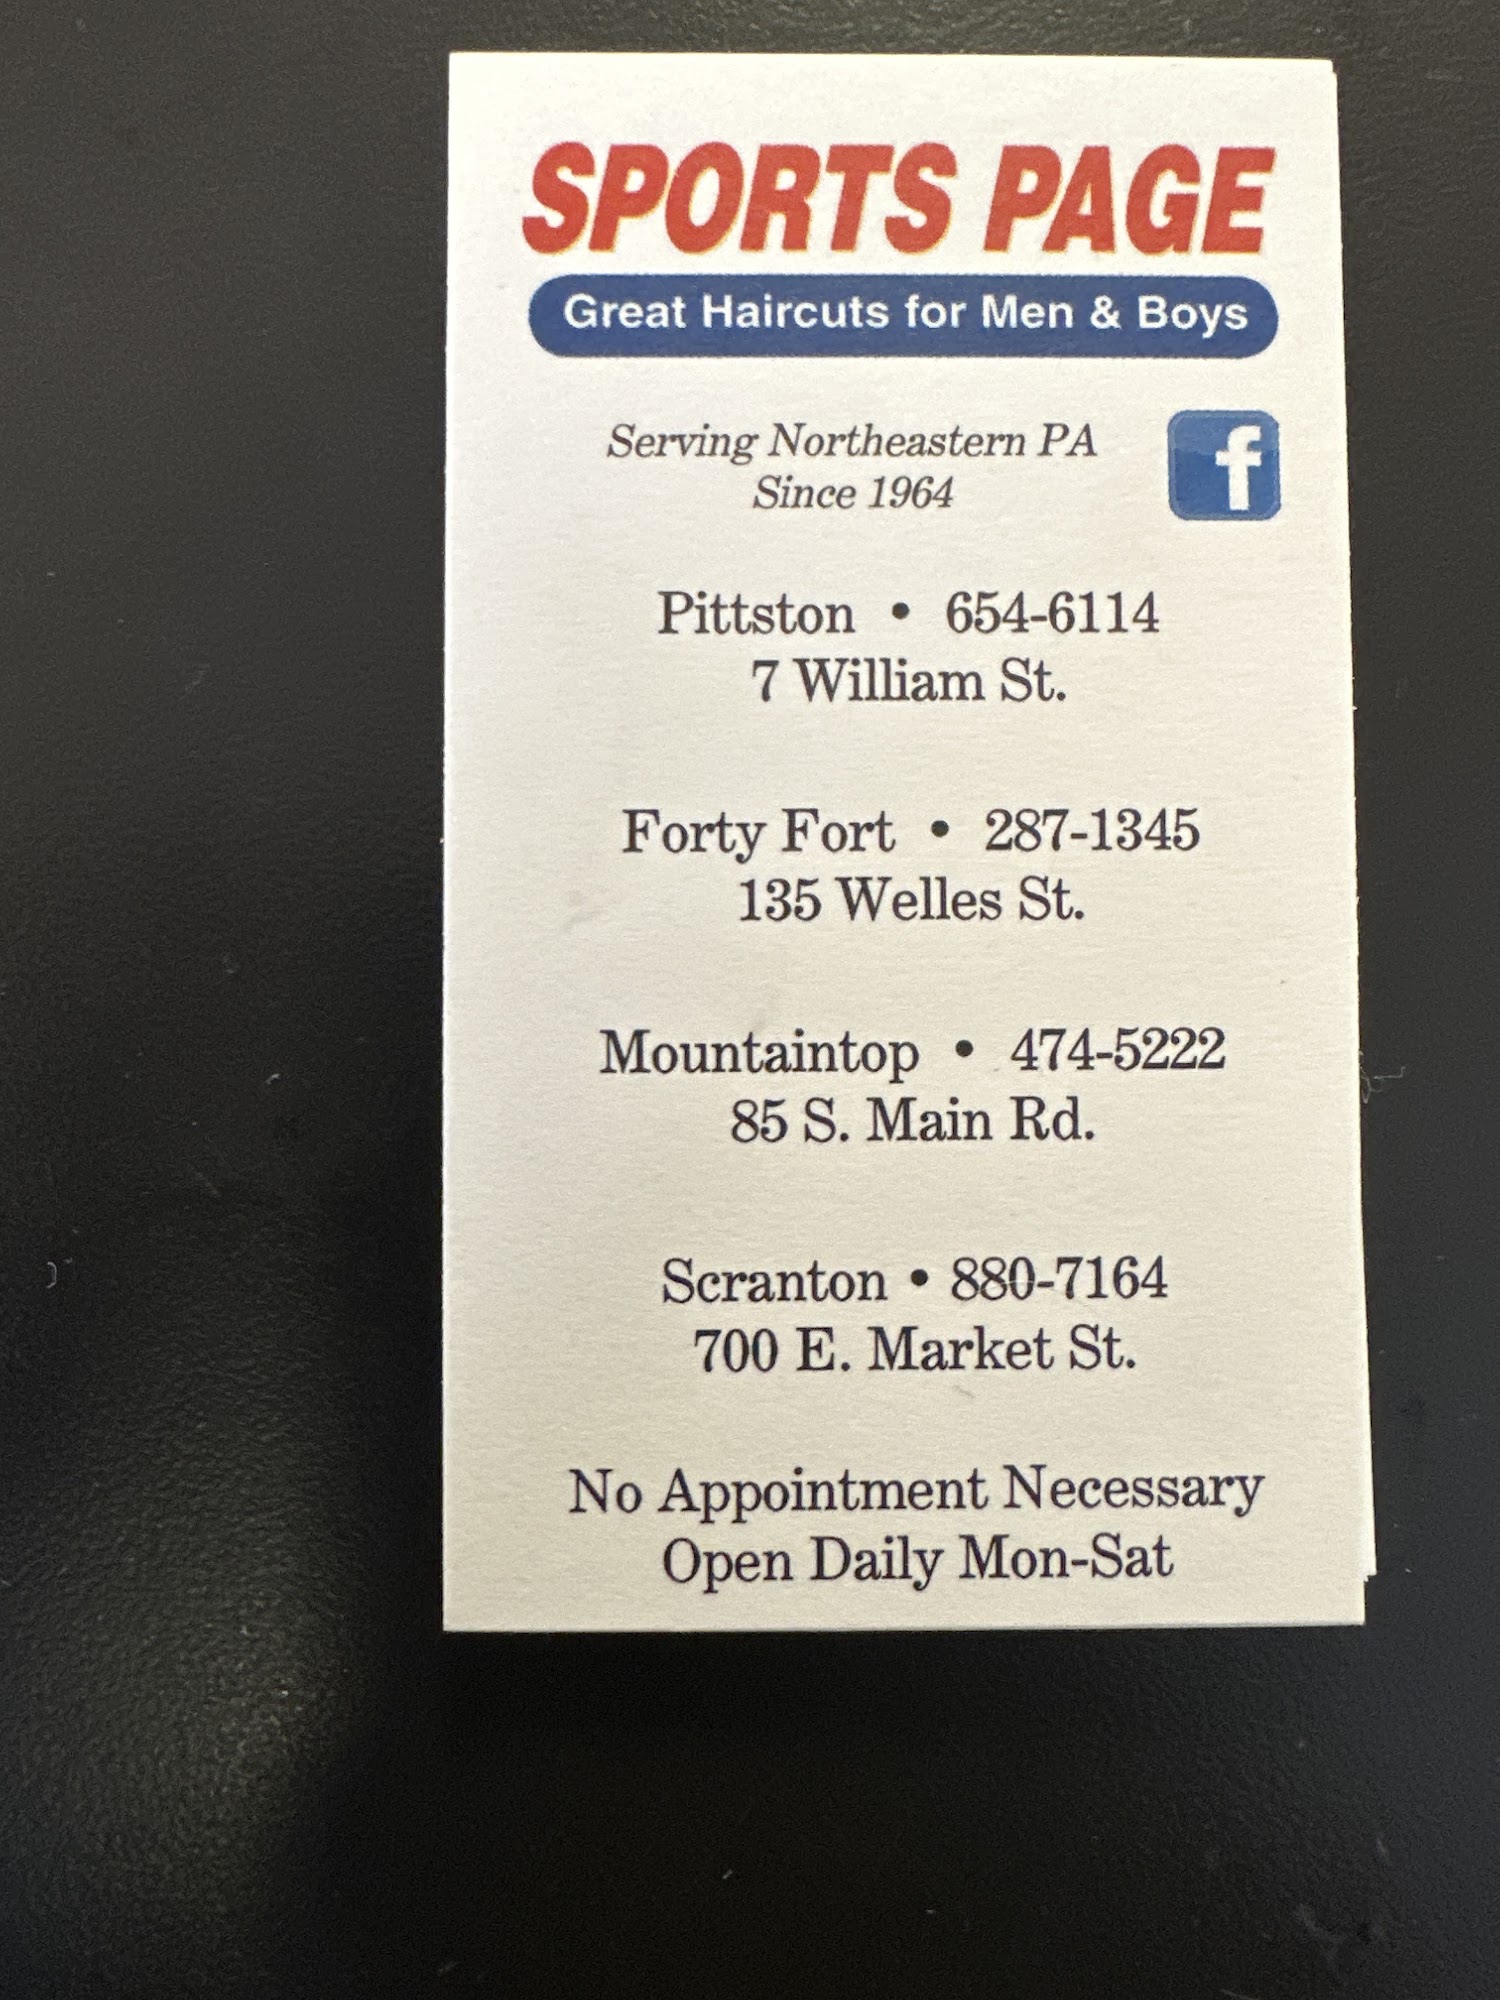 Sports Page Great Hair Cuts for Men & Boys 135 Welles St, Forty Fort Pennsylvania 18704